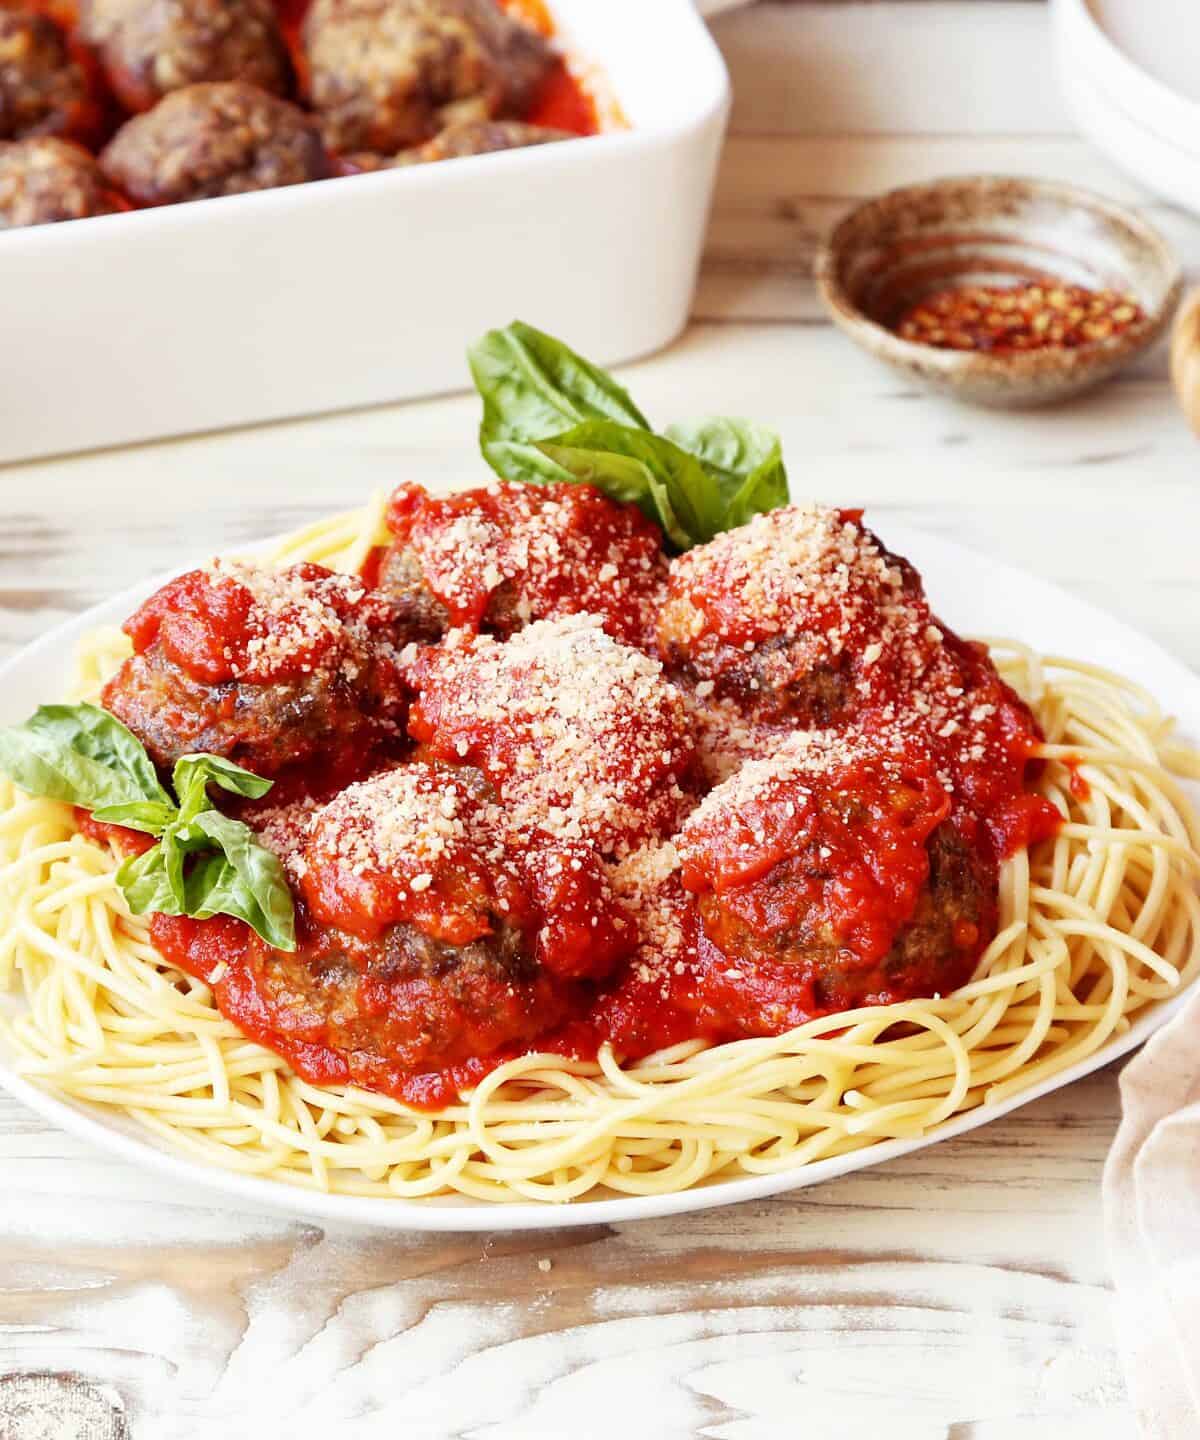  These meatballs are the real MVPs of my Italian grandmother's kitchen!